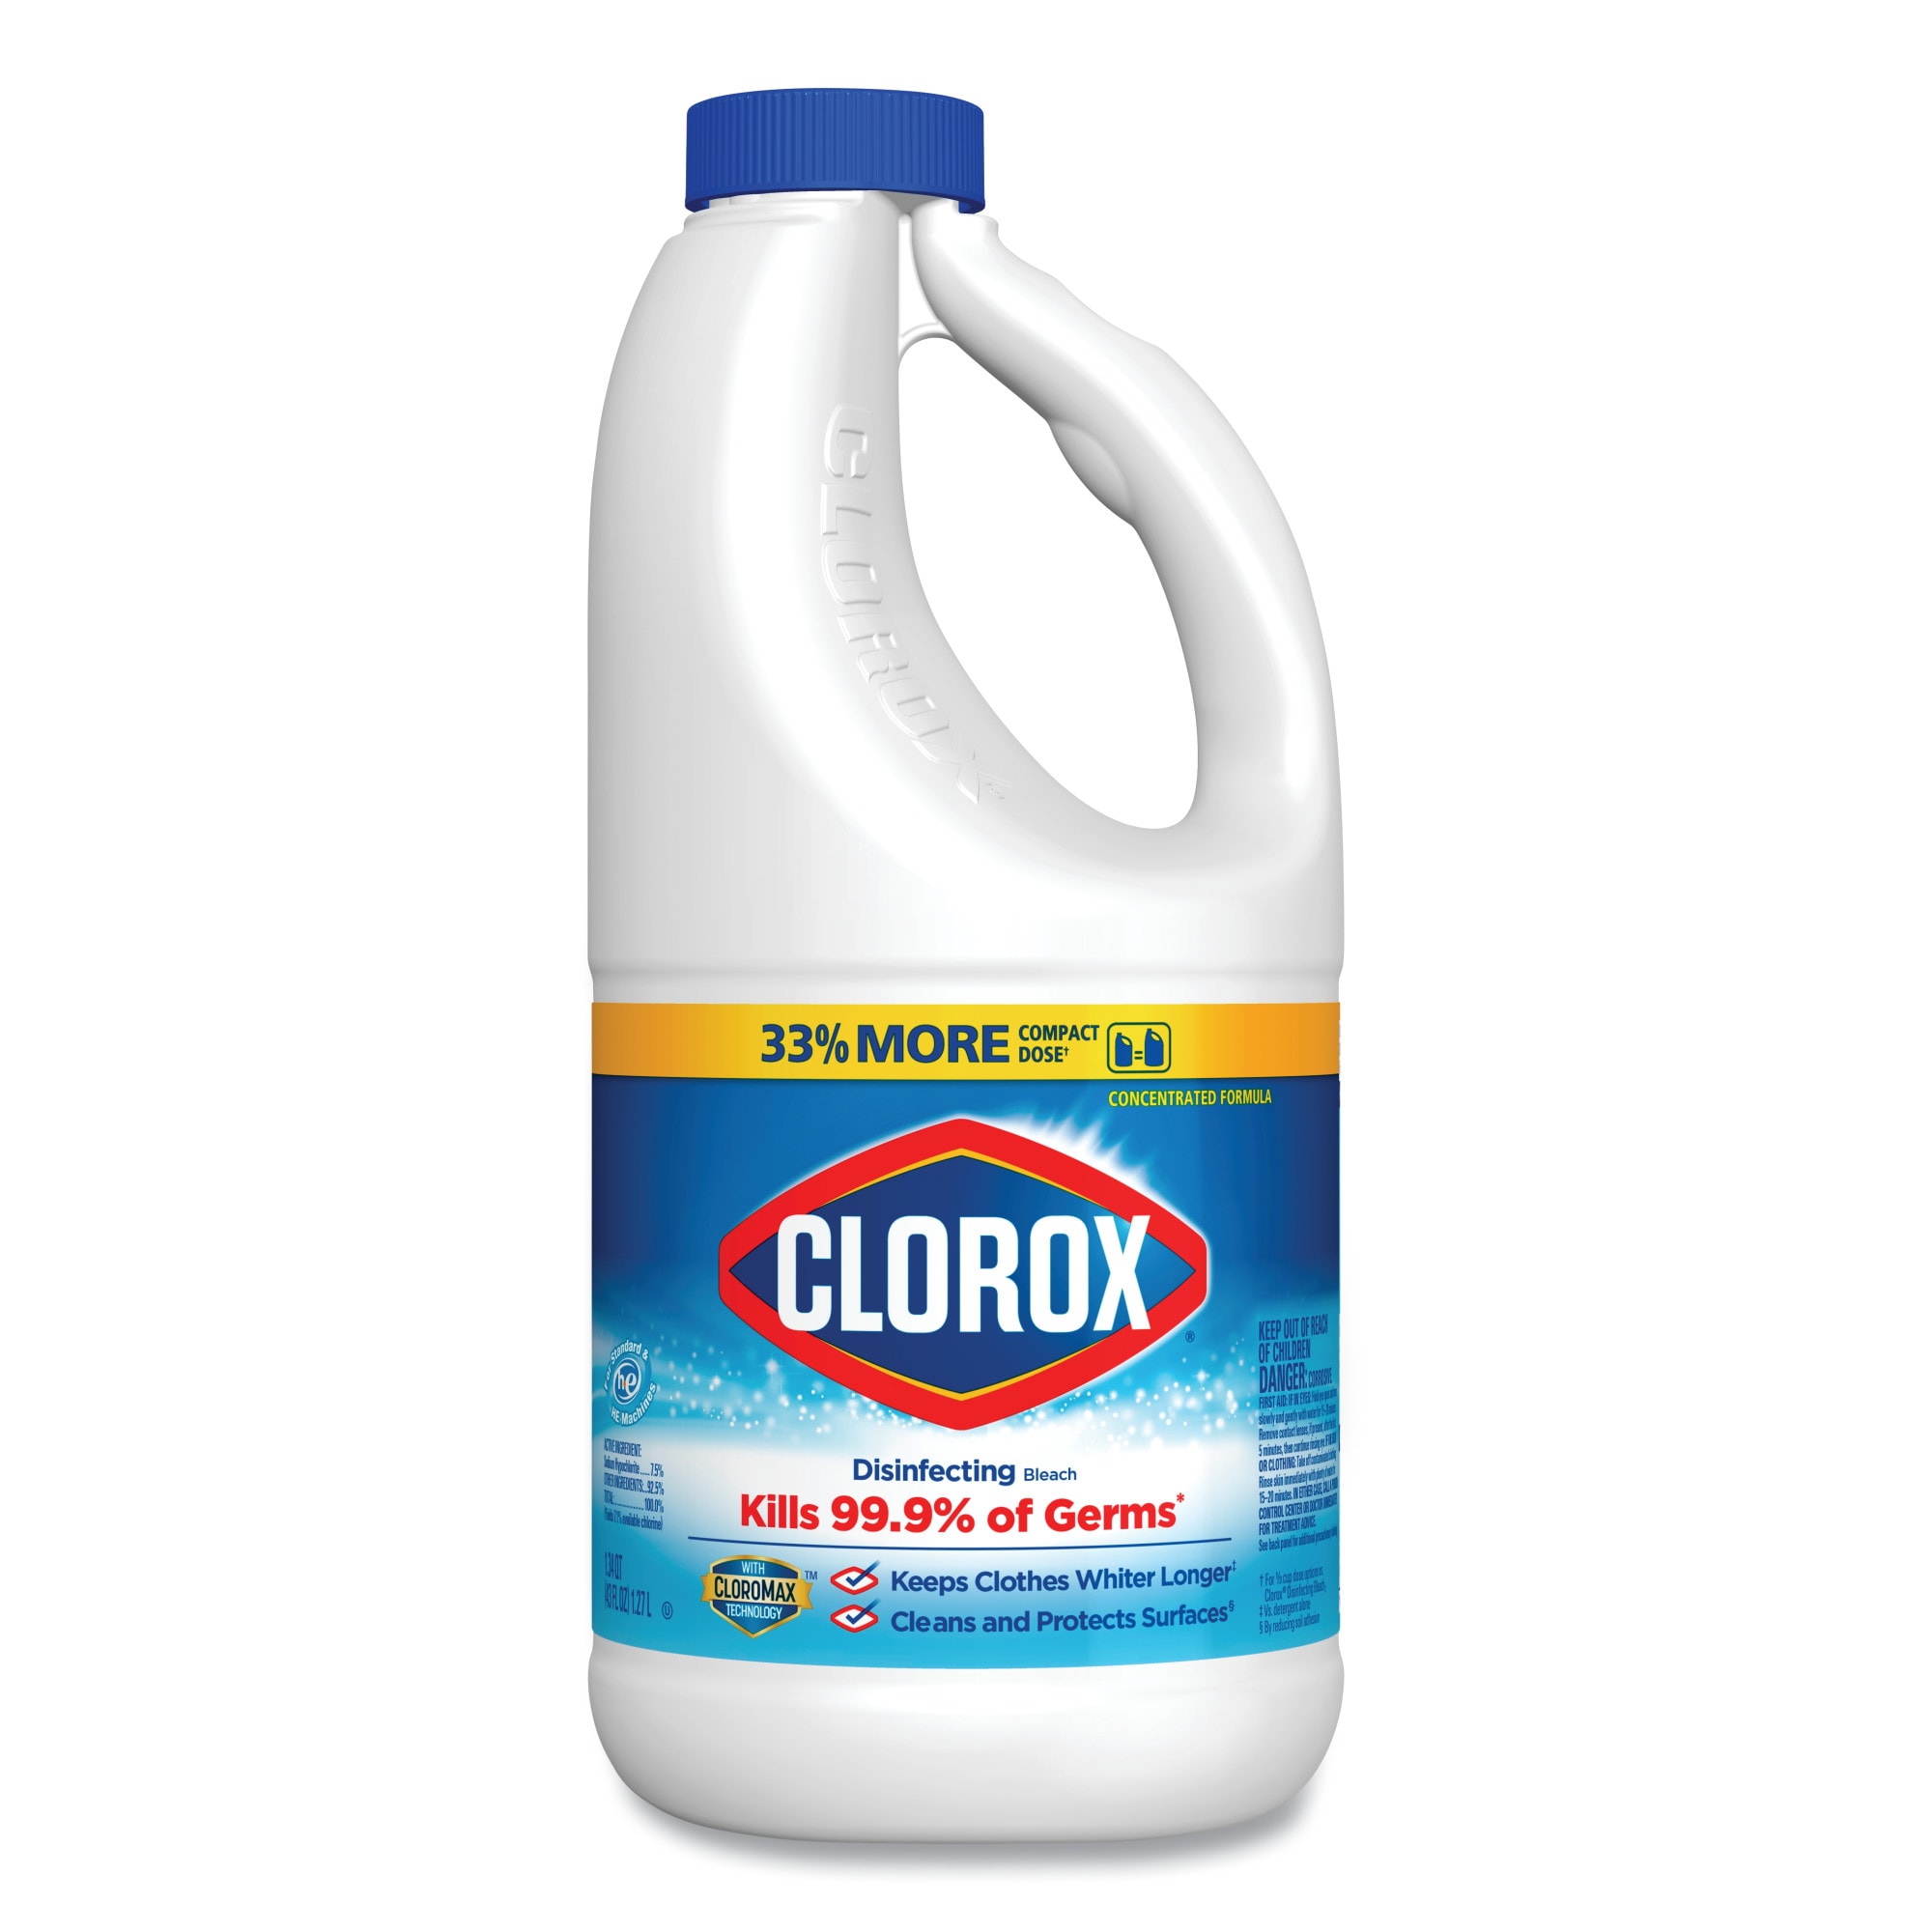 Clorox Bleach Stain Remover For Whites Review